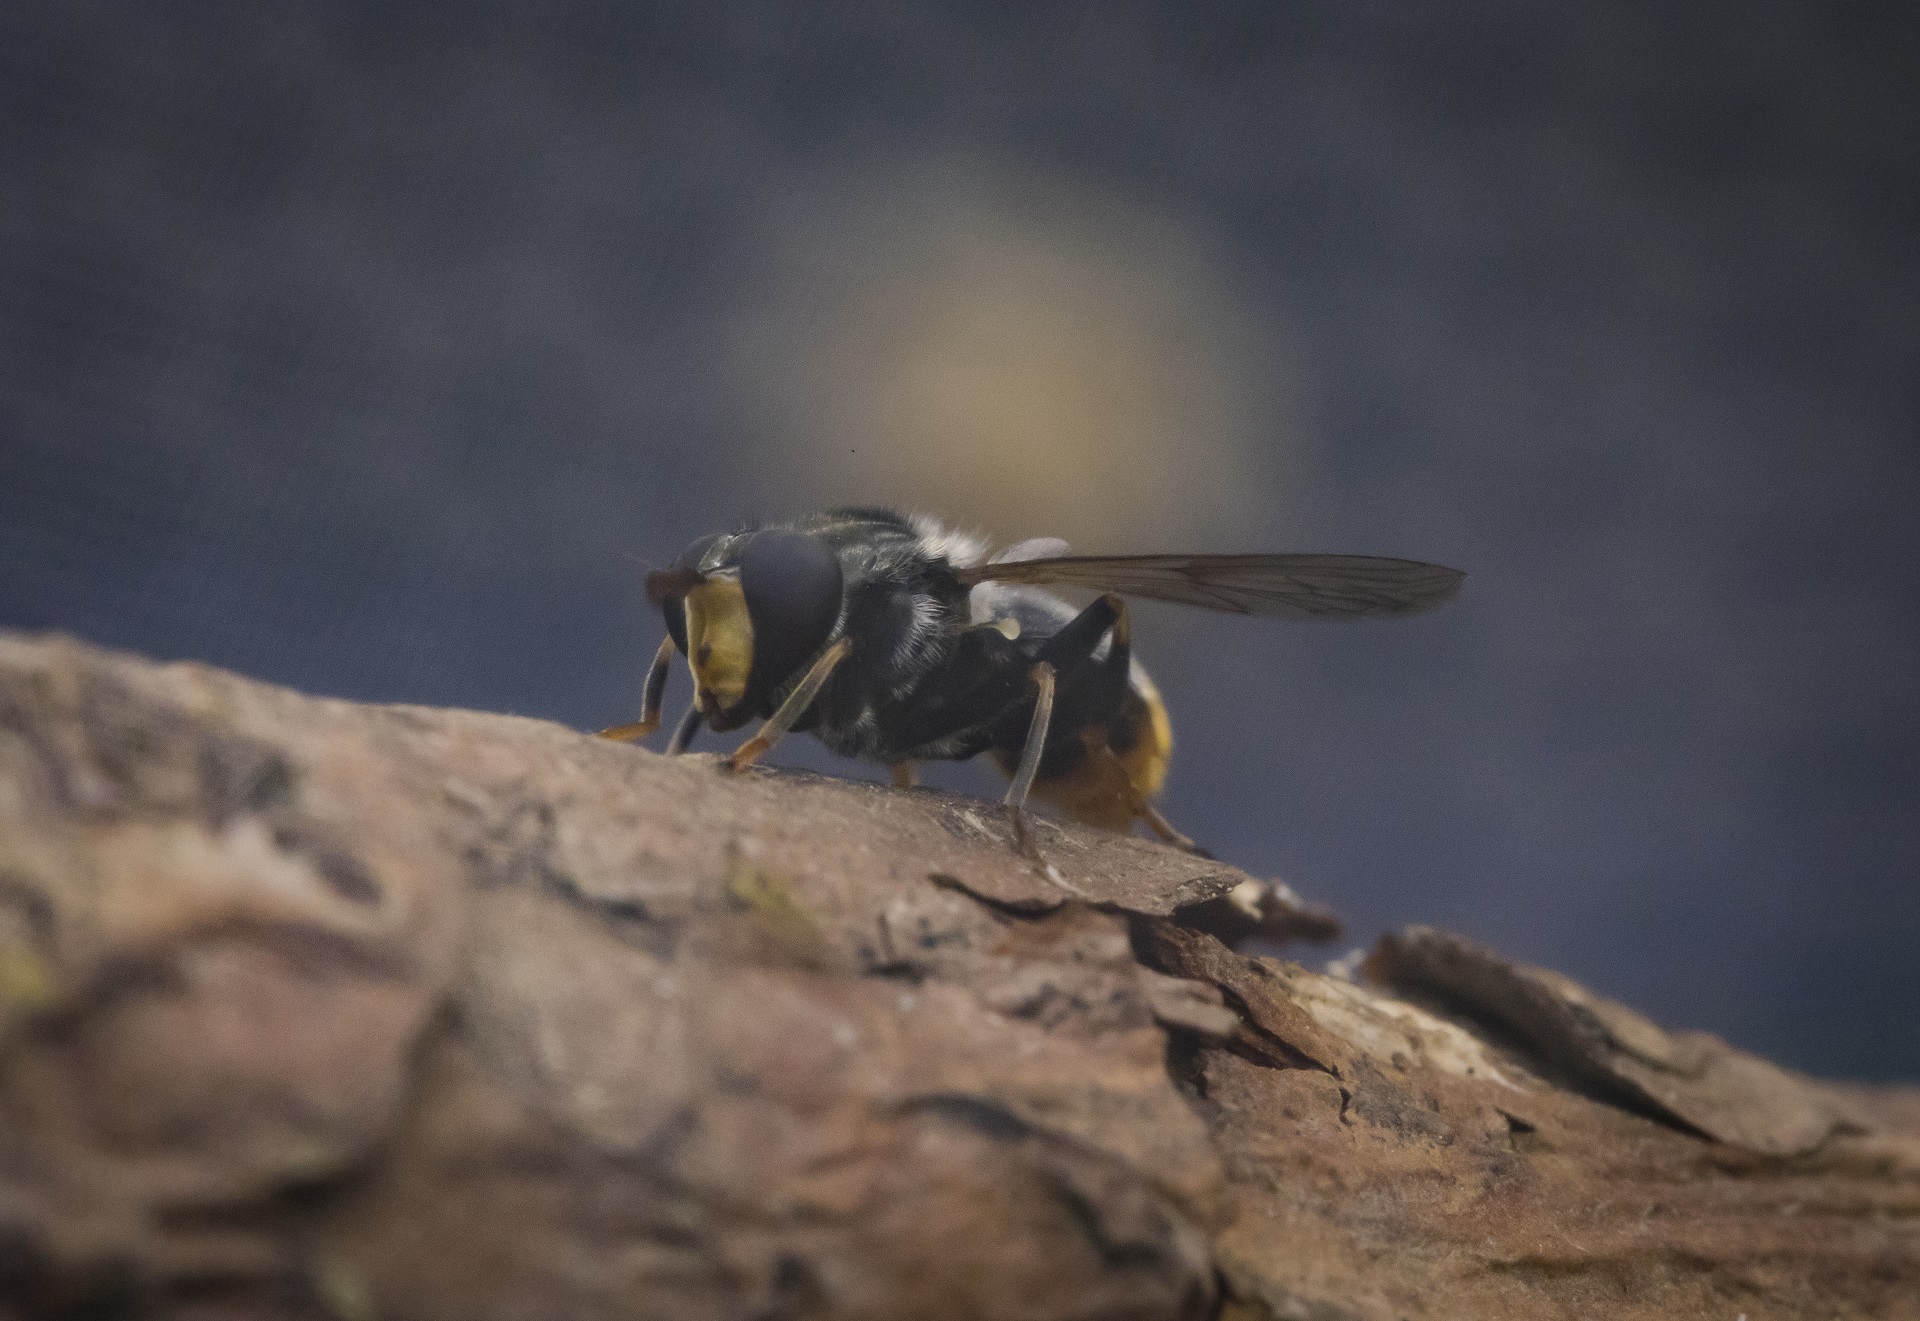 Pine hoverfly

IMAGE: JP 2019